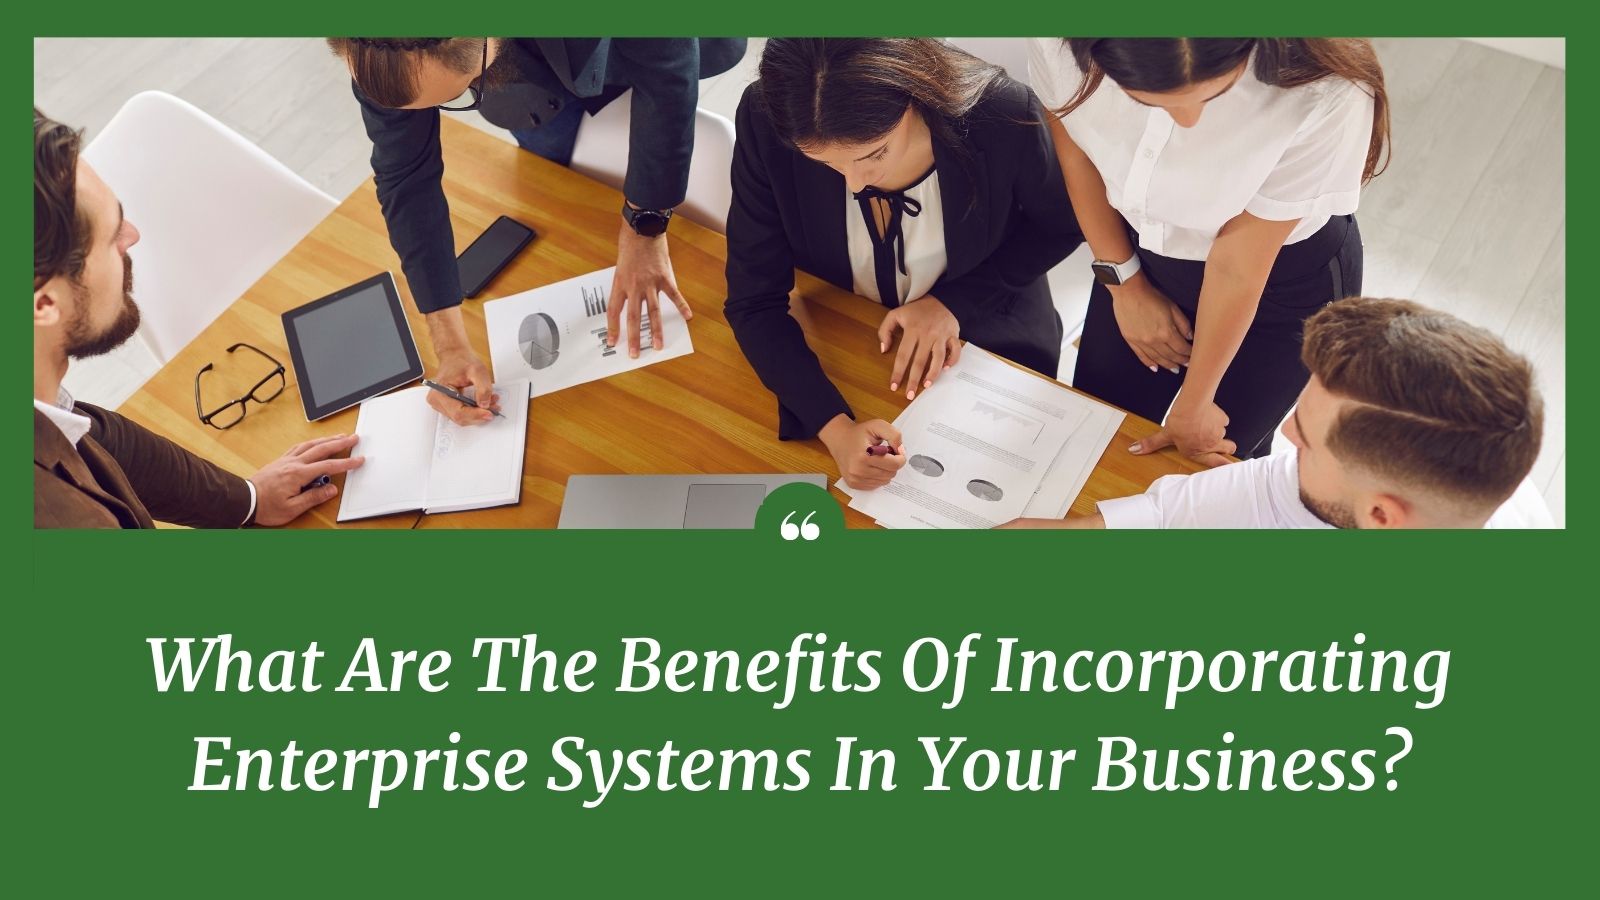 What Are The Benefits Of Incorporating Enterprise Systems In Your Business?